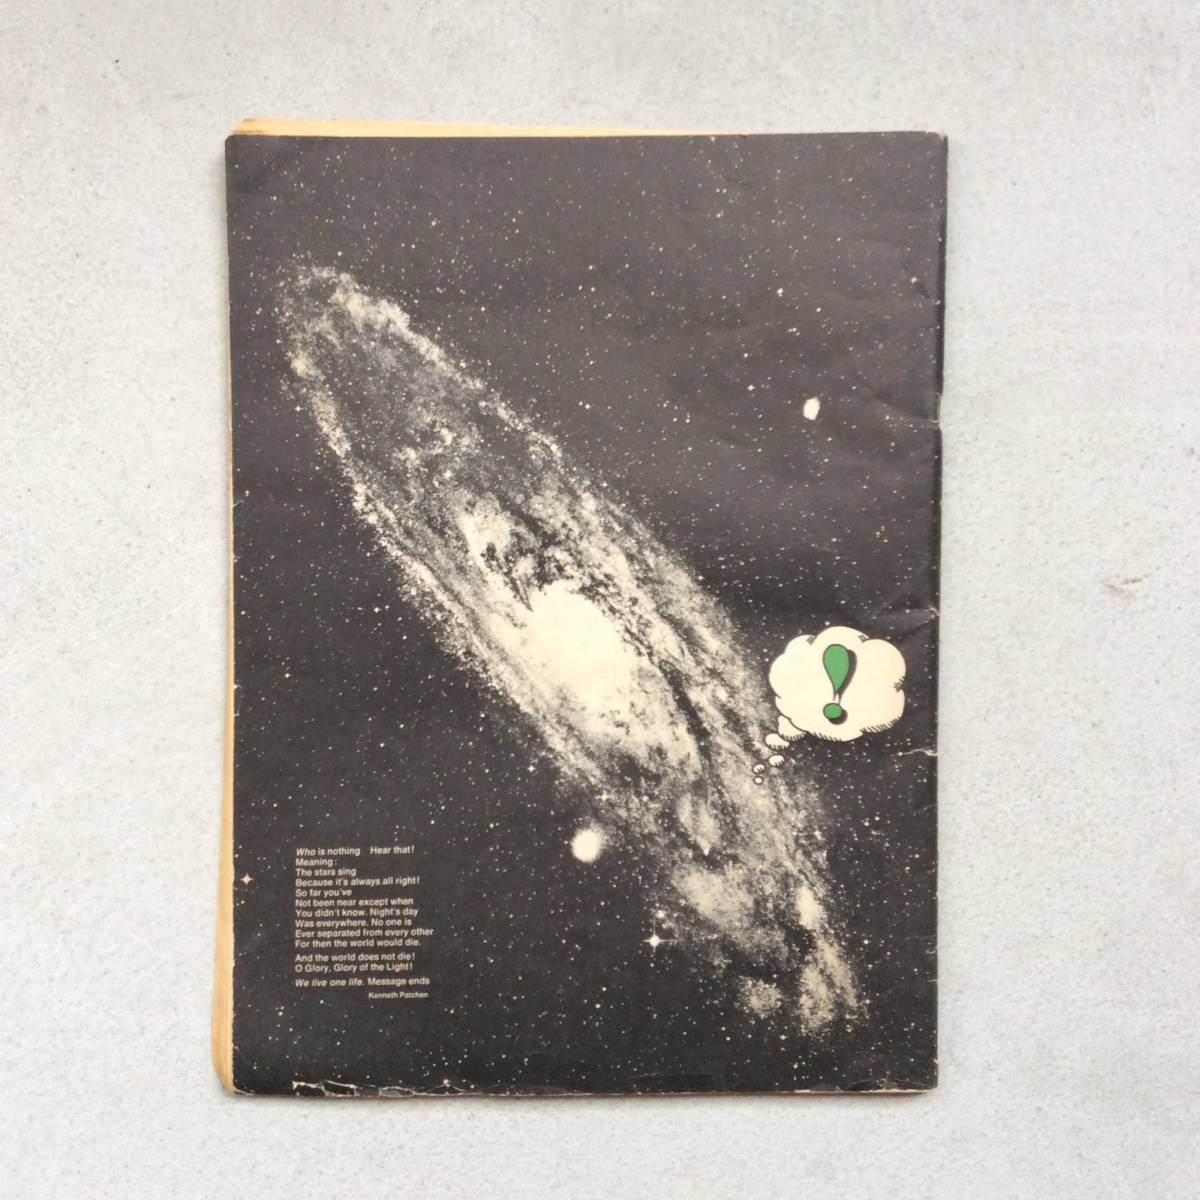 WHOLE EARTH CATALOG Spring 1970 | horn lure s catalog 1970 year issue 